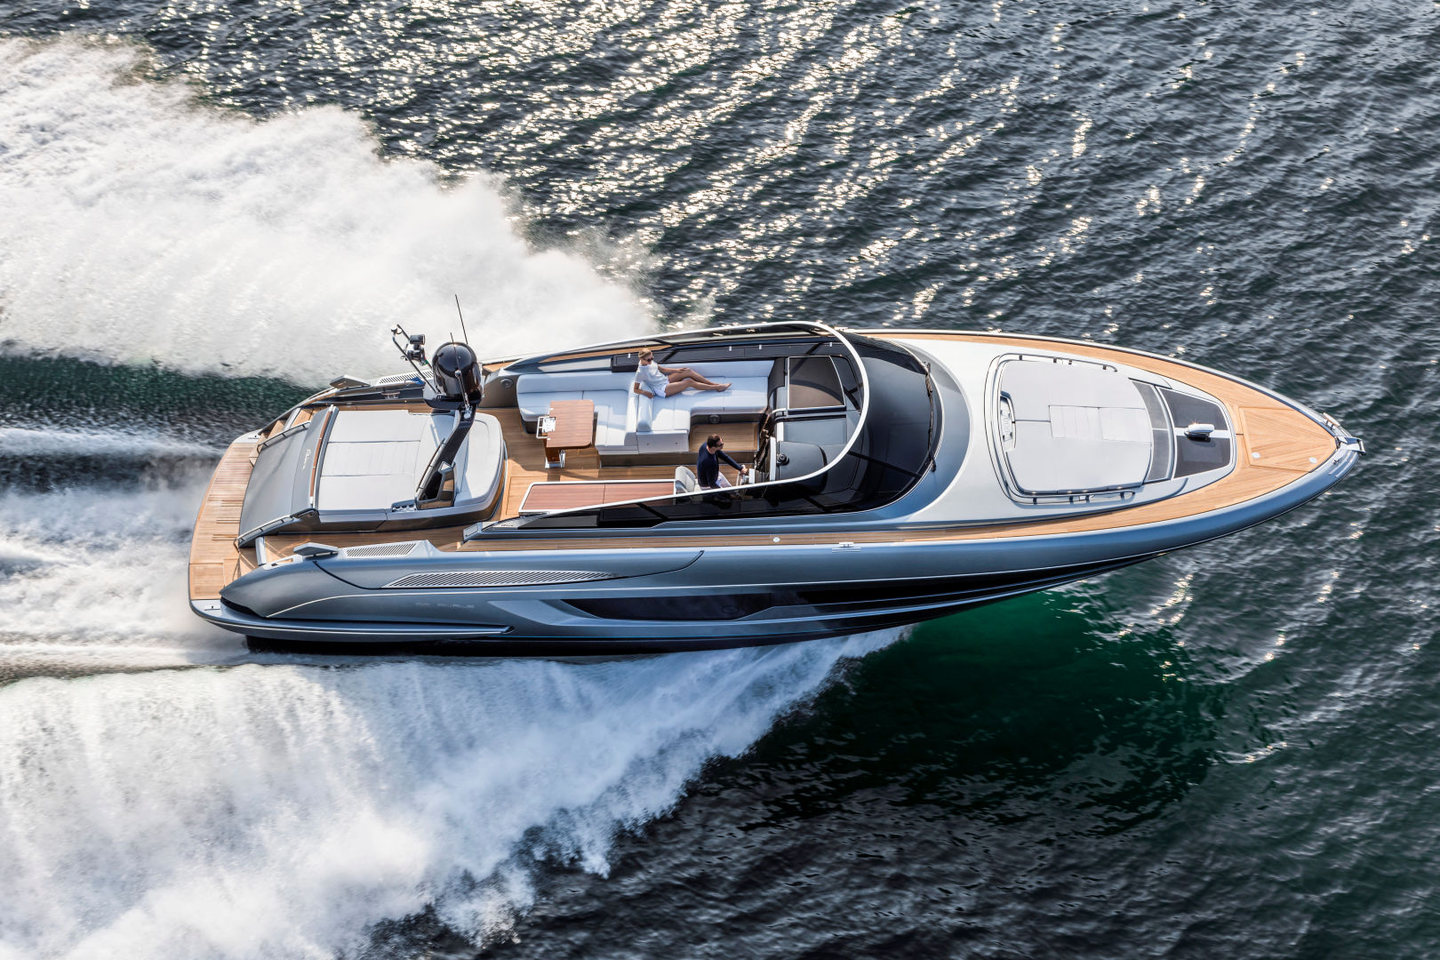 360 VR Virtual Tours of the Riva 56 Rivale